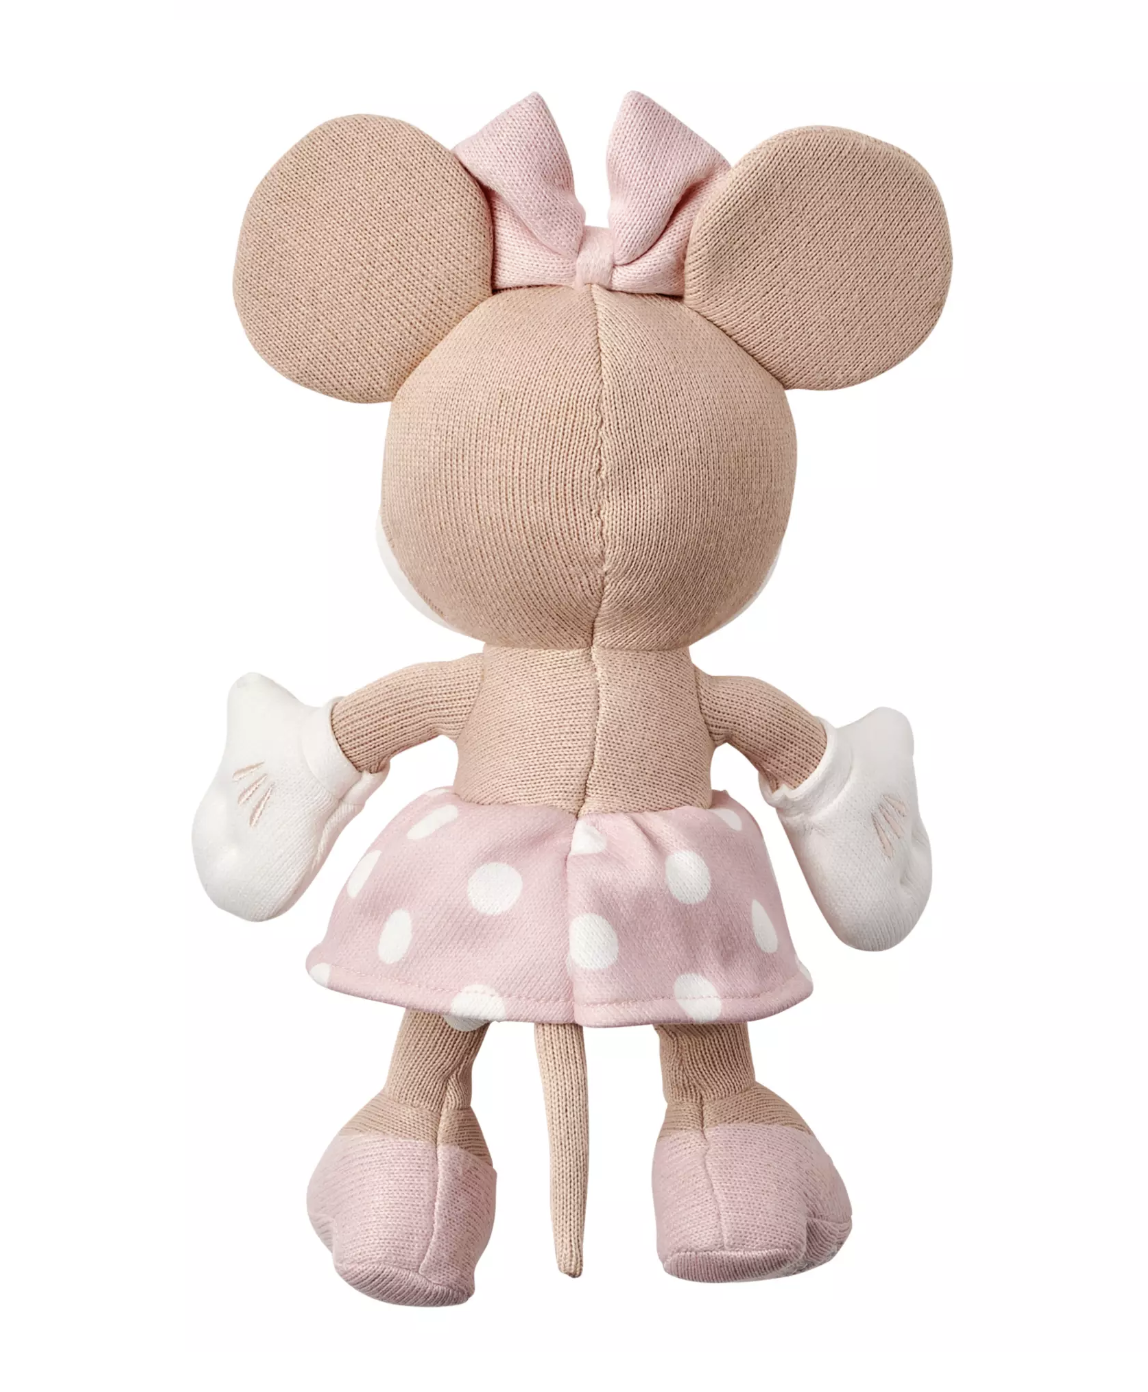 Disney Baby My First Minnie 2023 Plush for Baby New with Tag